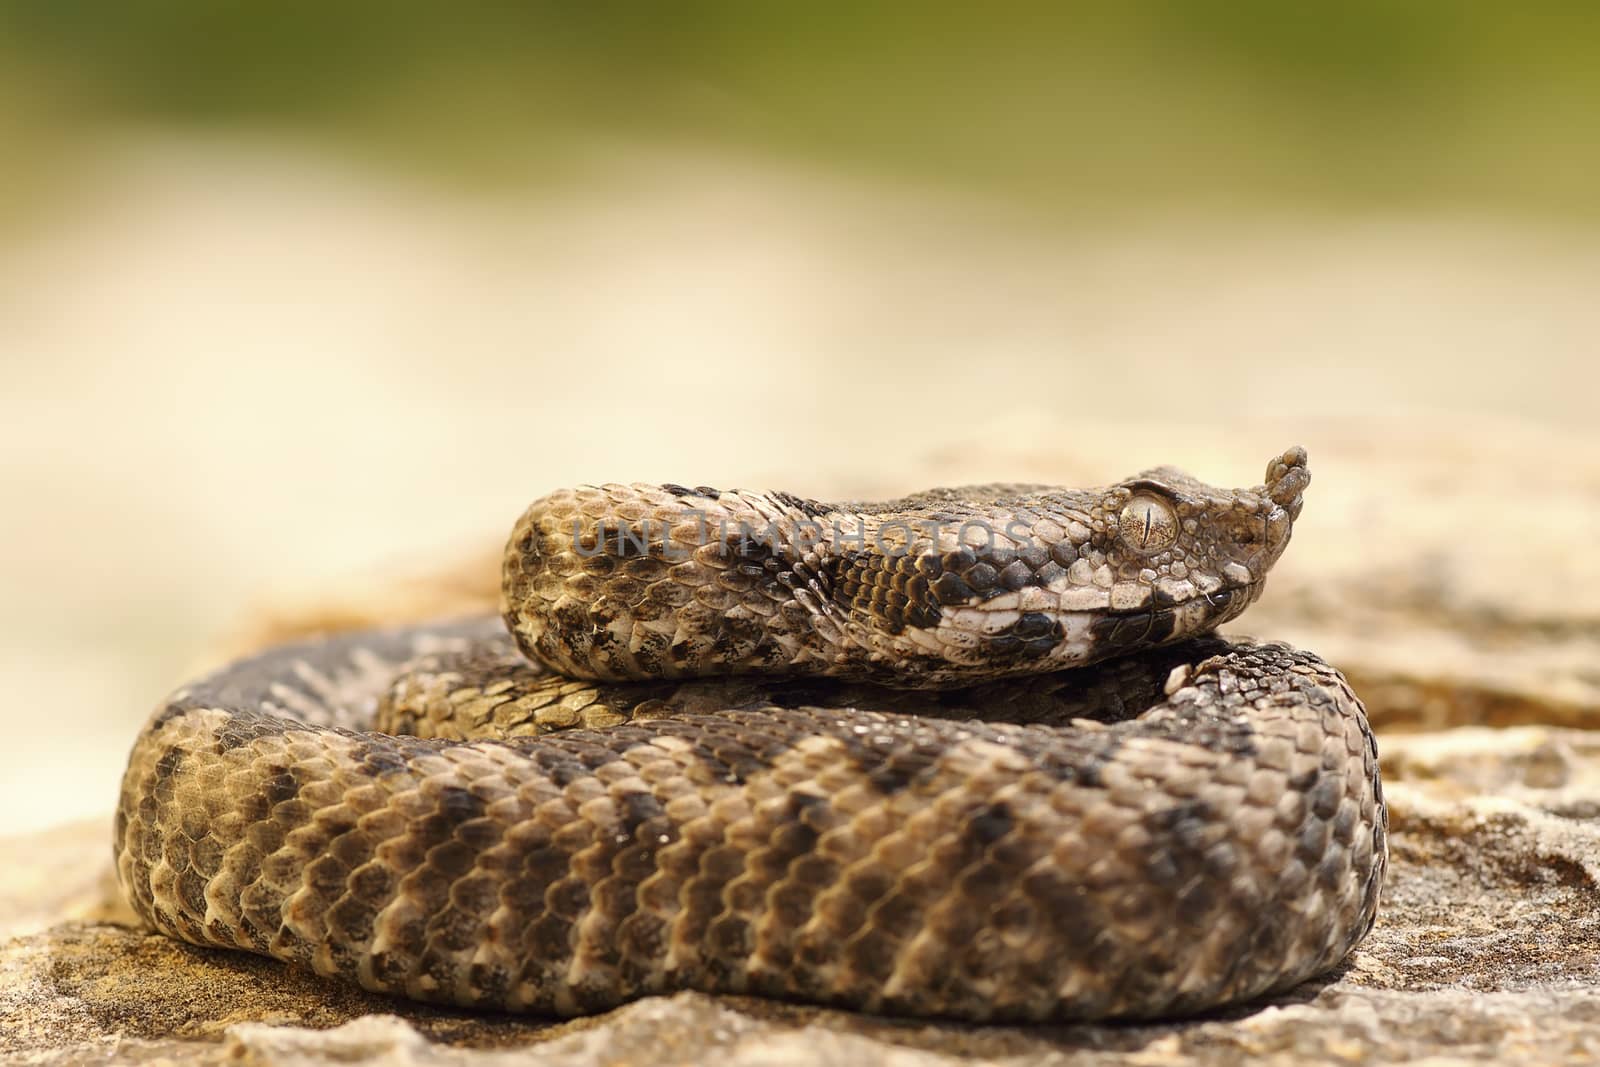 poisonous snake youngster basking on stone ( nose horned viper, Vipera ammodytes )